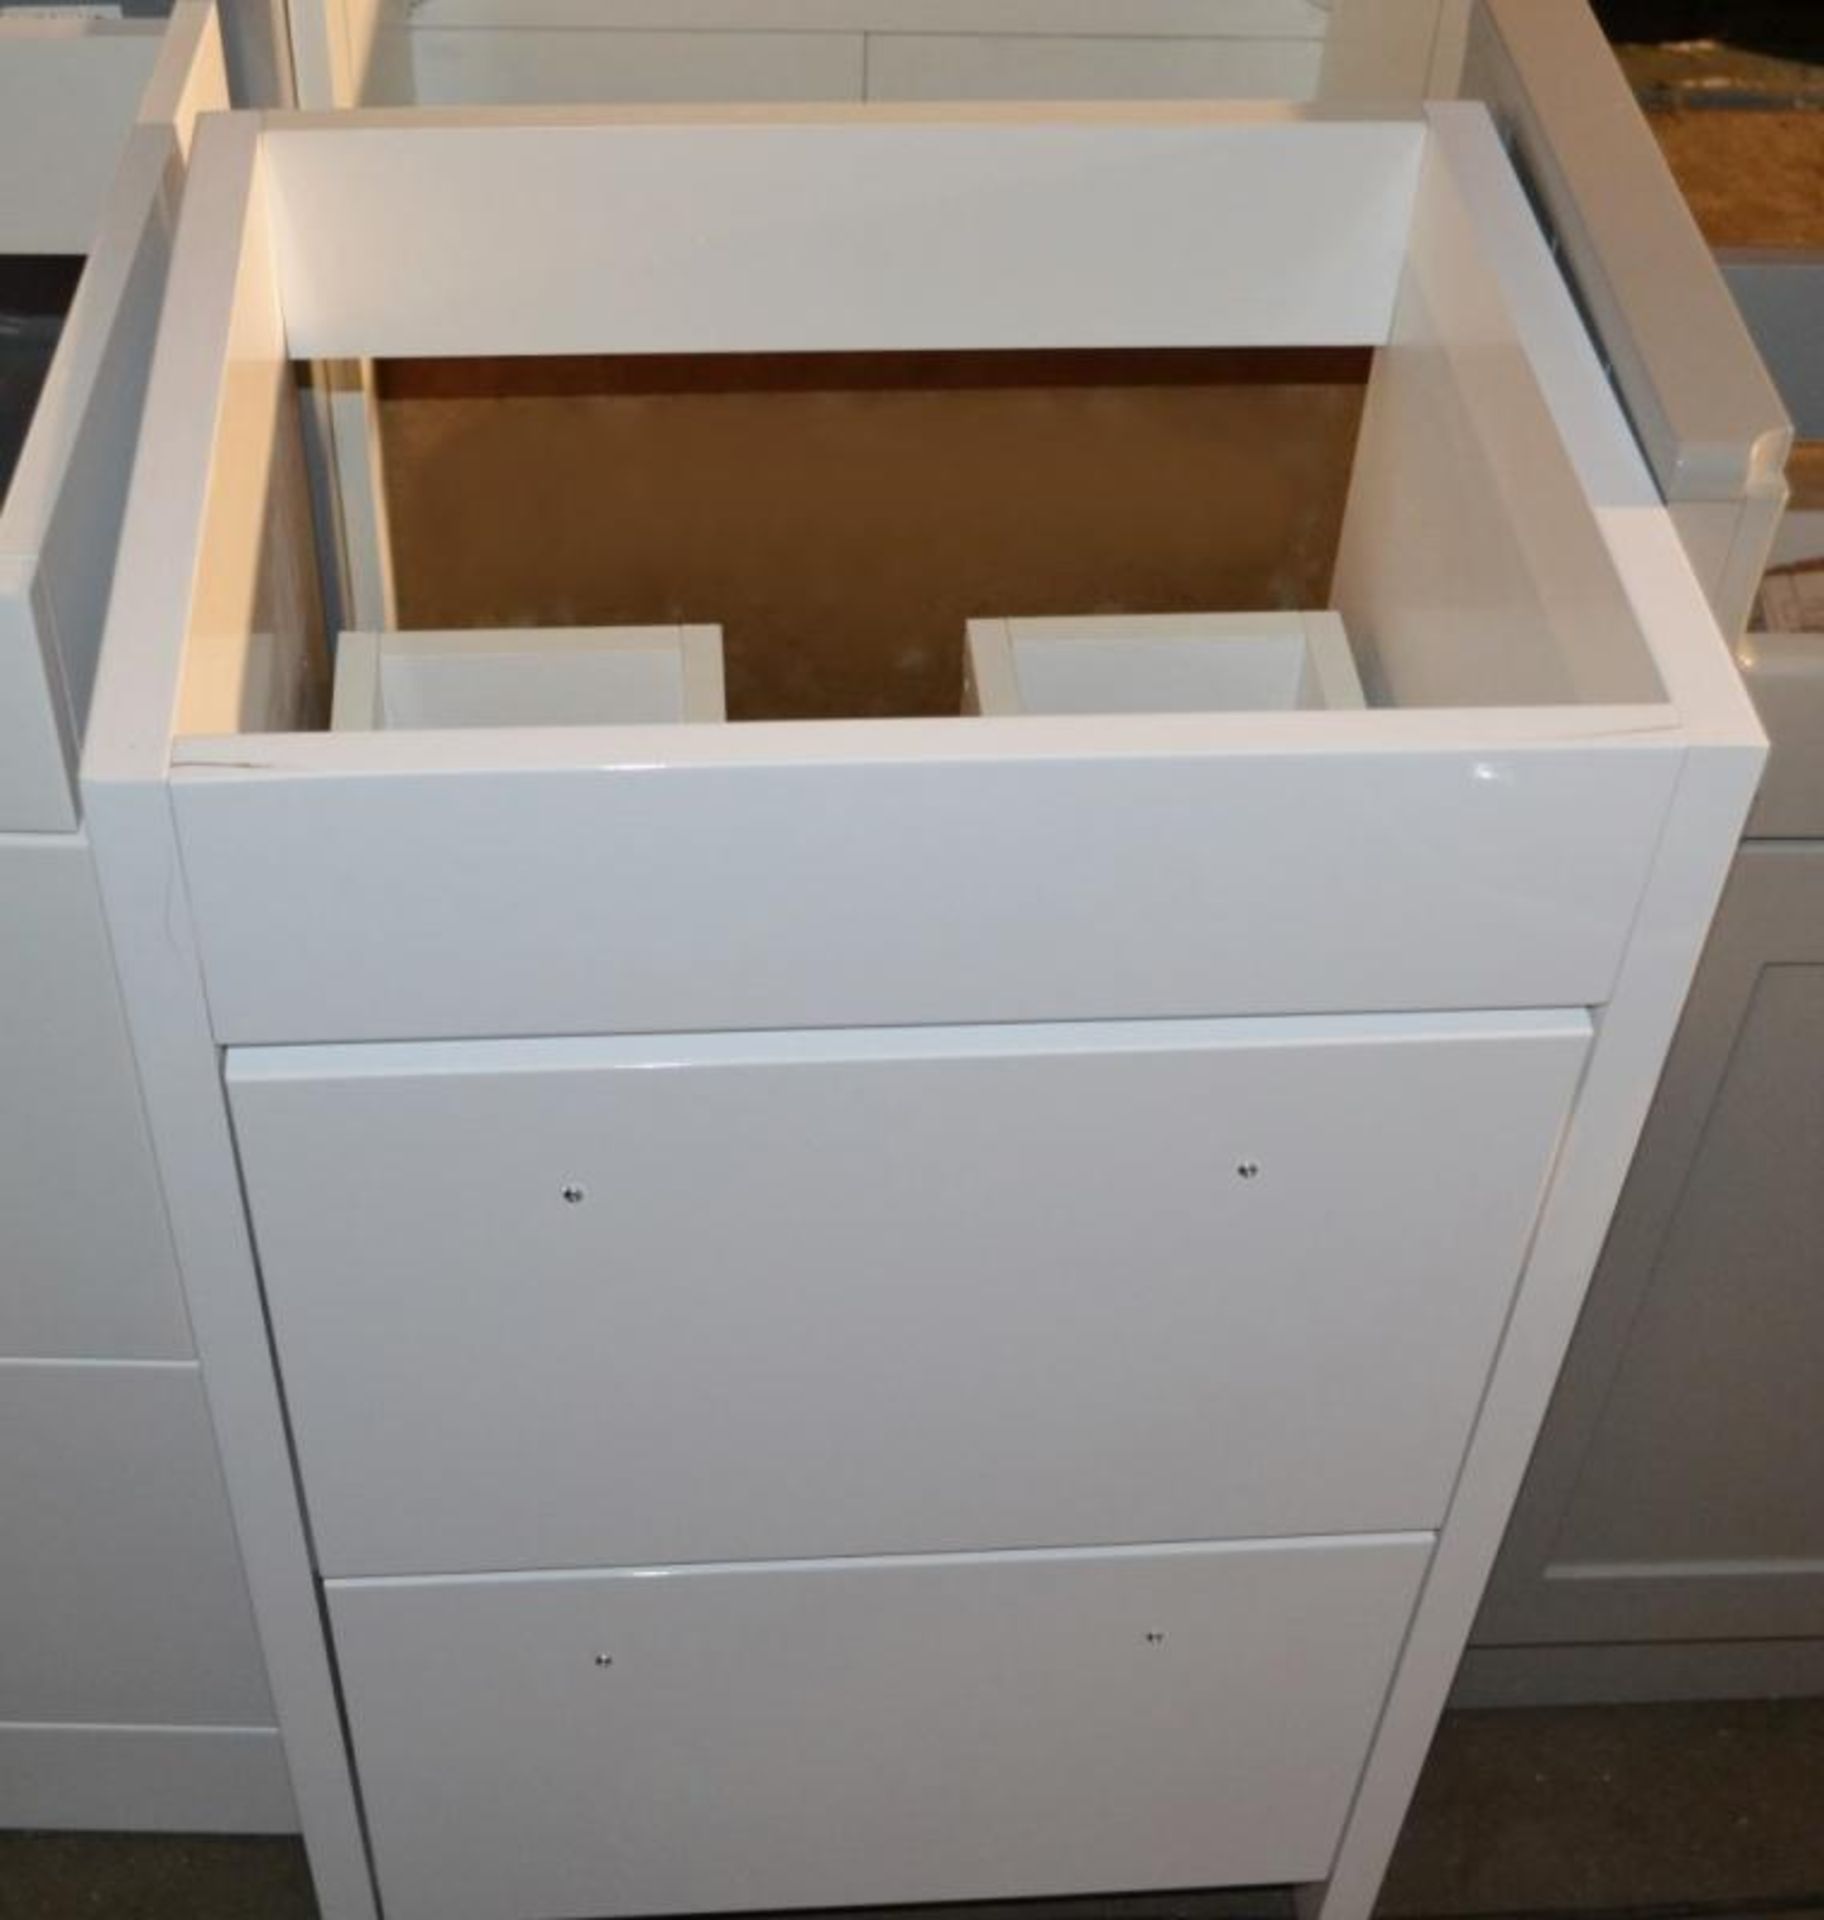 1 x Freestanding 2-Drawer Vanity Basin Unit In A Gloss White Finish - New / Unused Stock - Dimension - Image 6 of 6